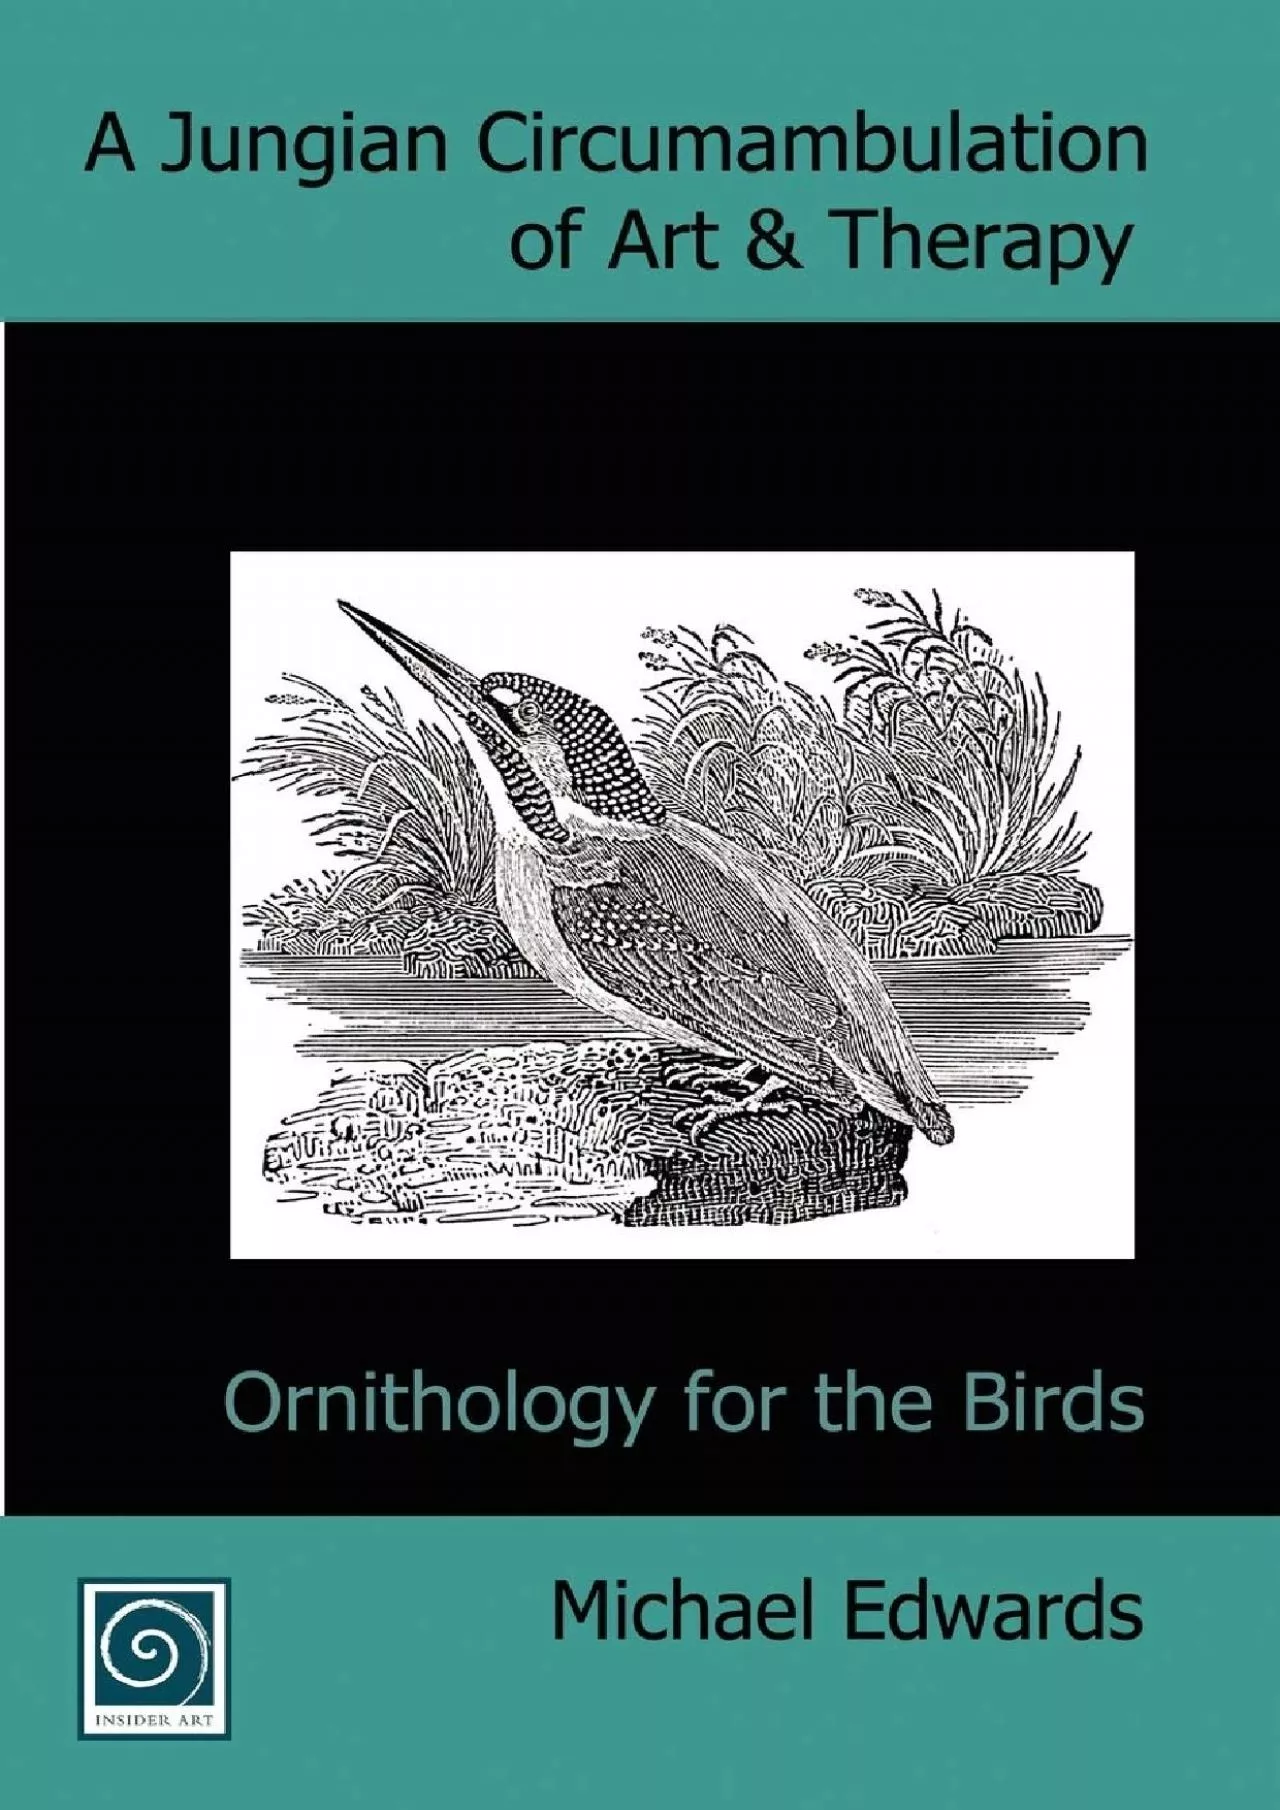 (READ)-A Jungian Circumambulation of Art & Therapy: Ornithology for the Birds